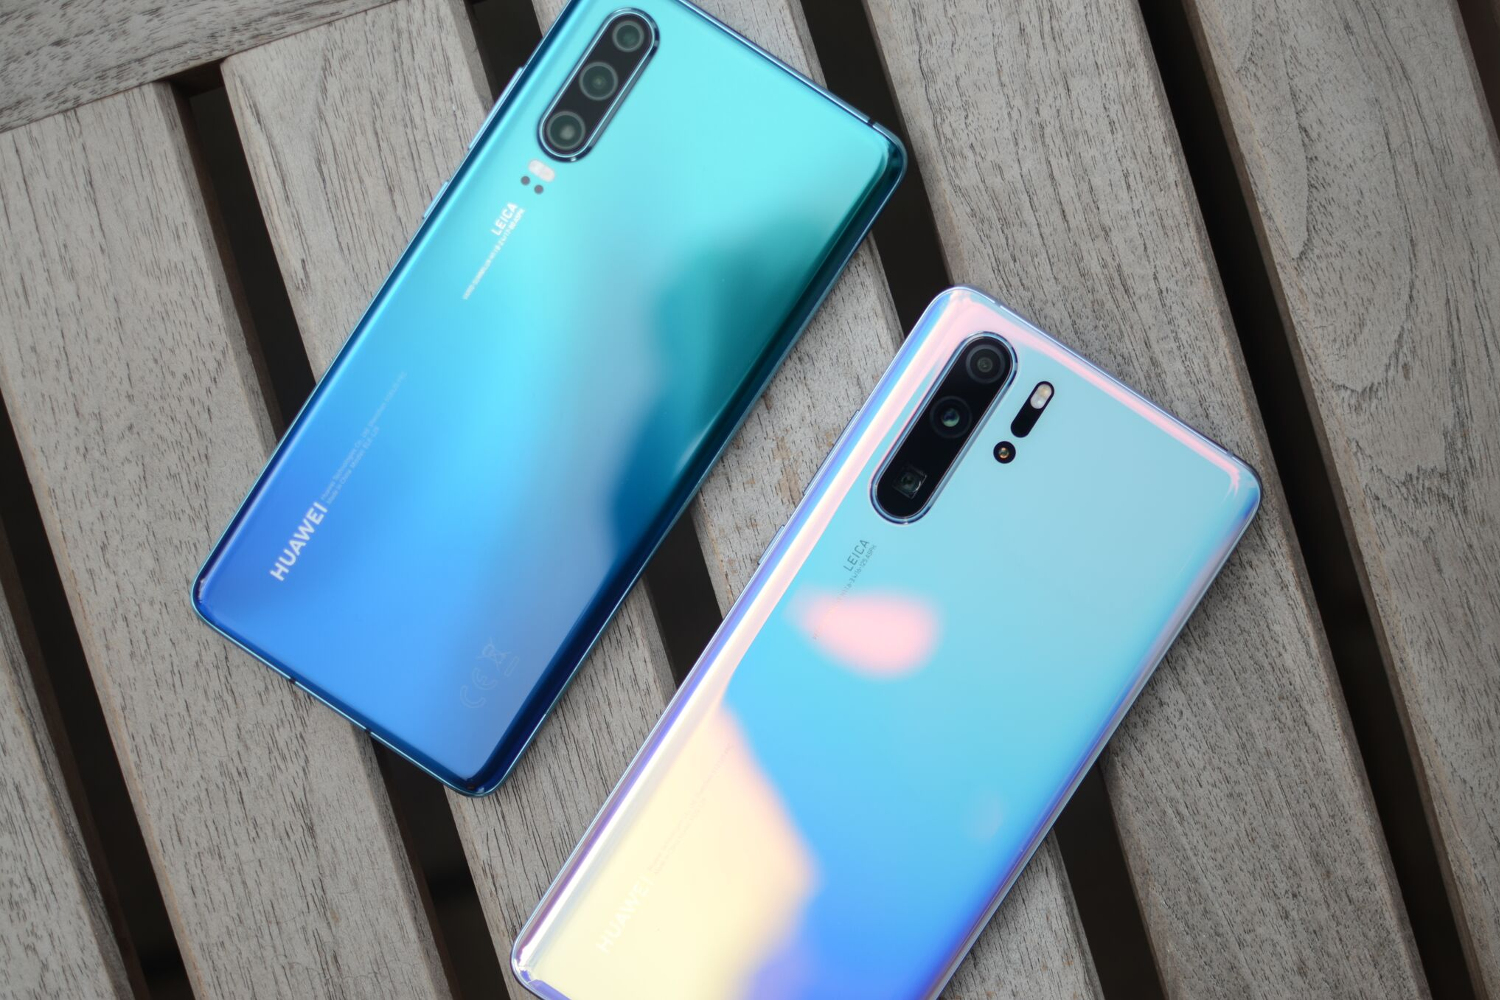 Huawei P30 Pro and P30